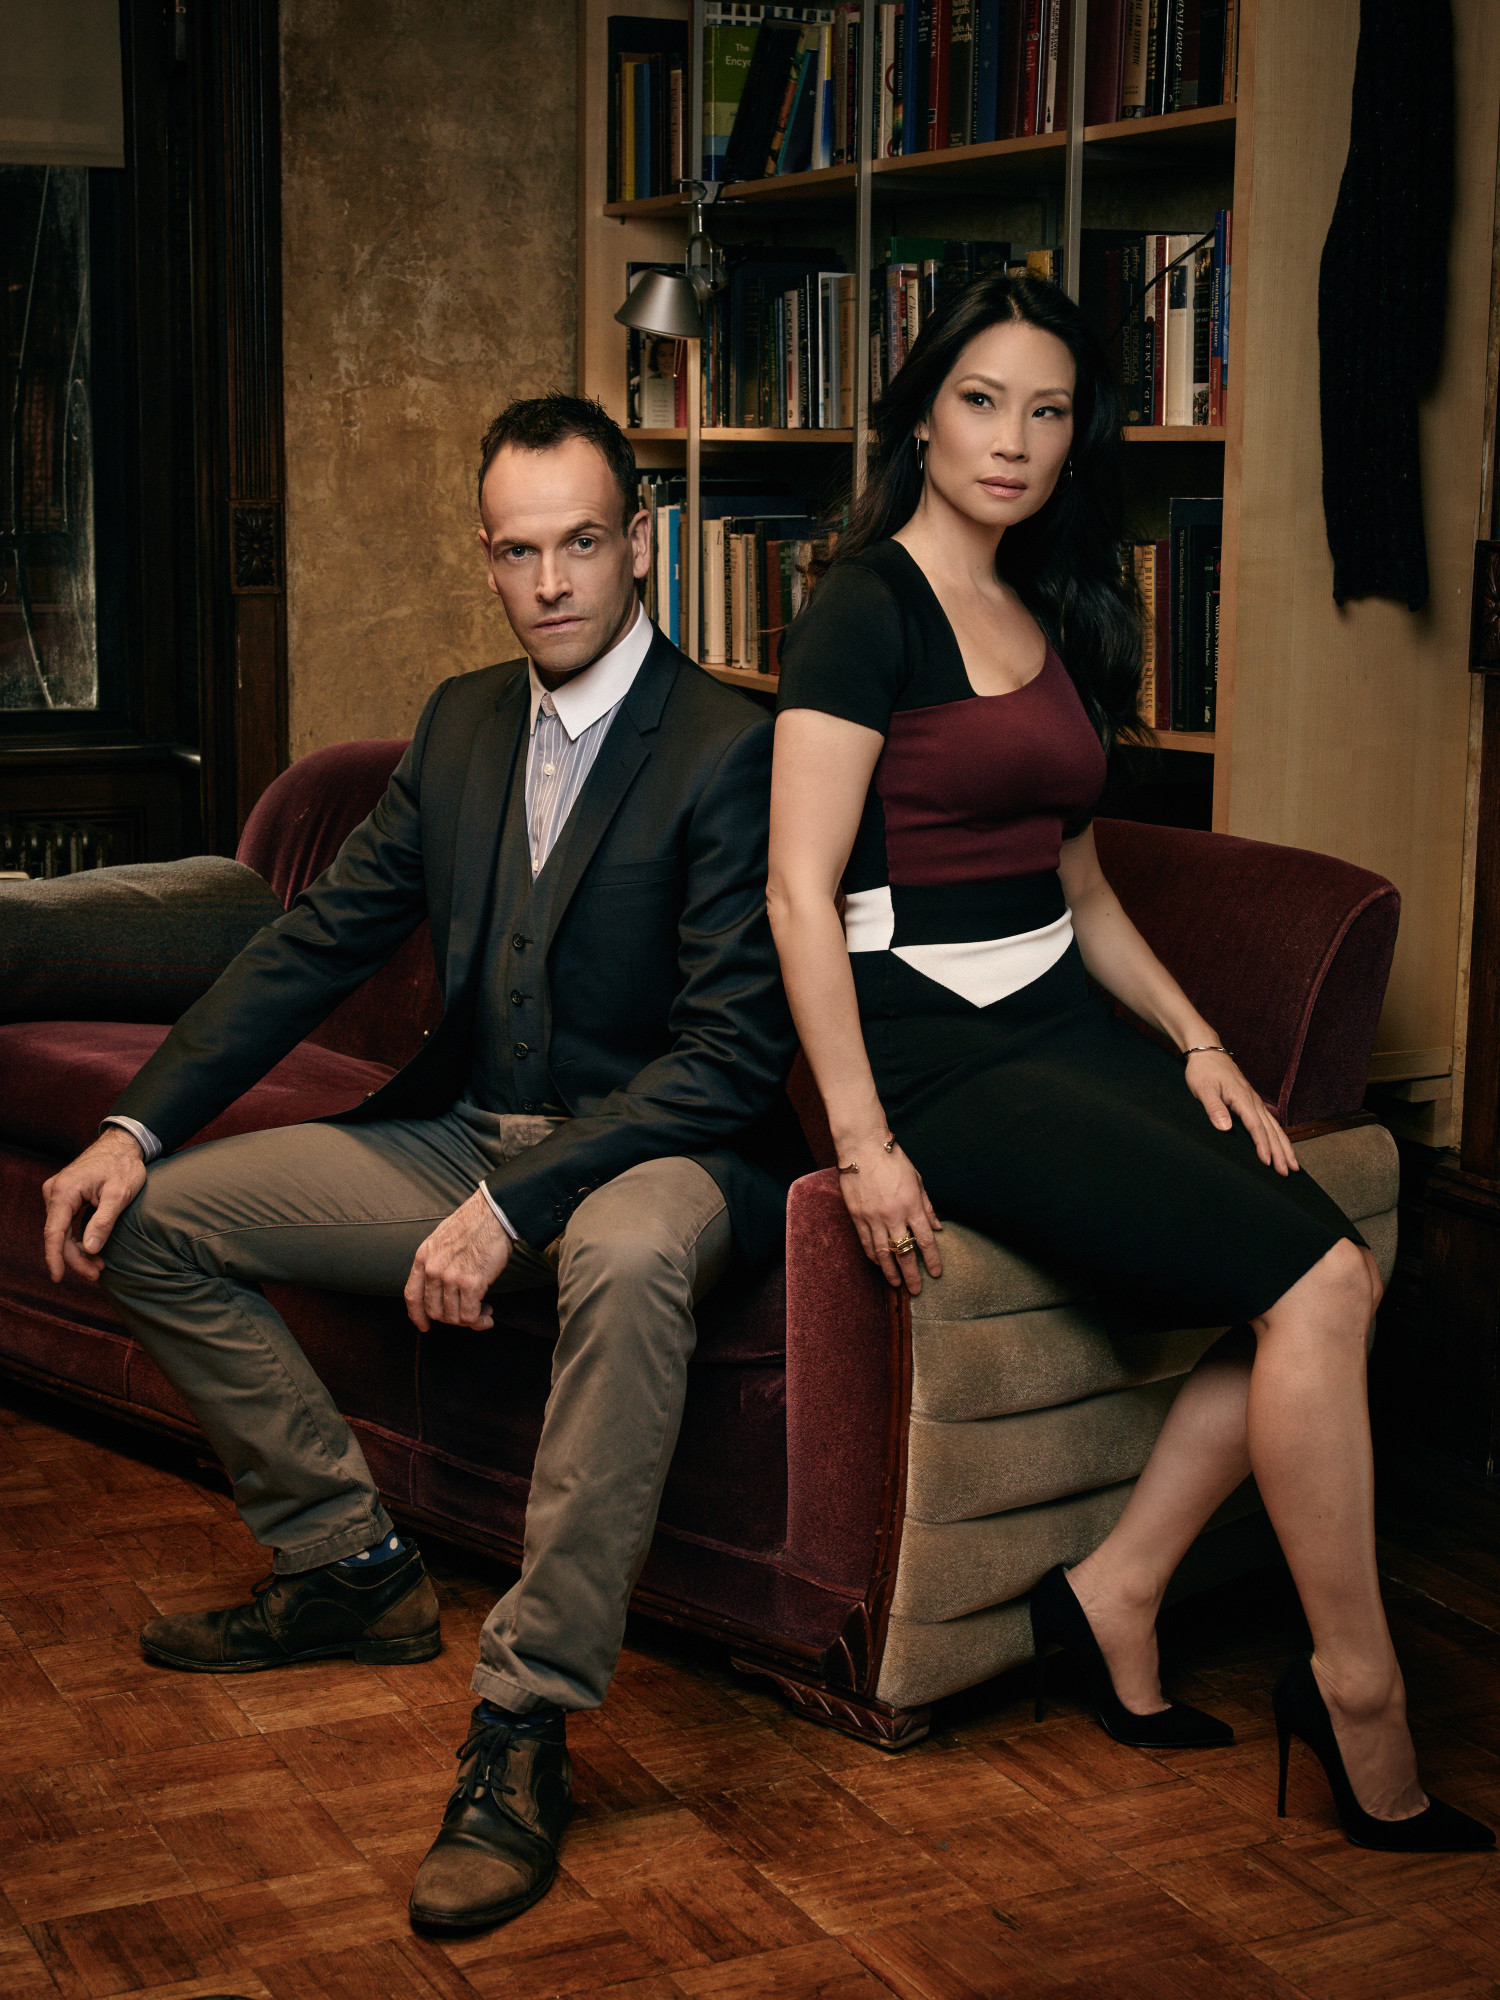 Stars Jonny Lee Miller and Lucy Liu were in Valley Stream for the shoot.